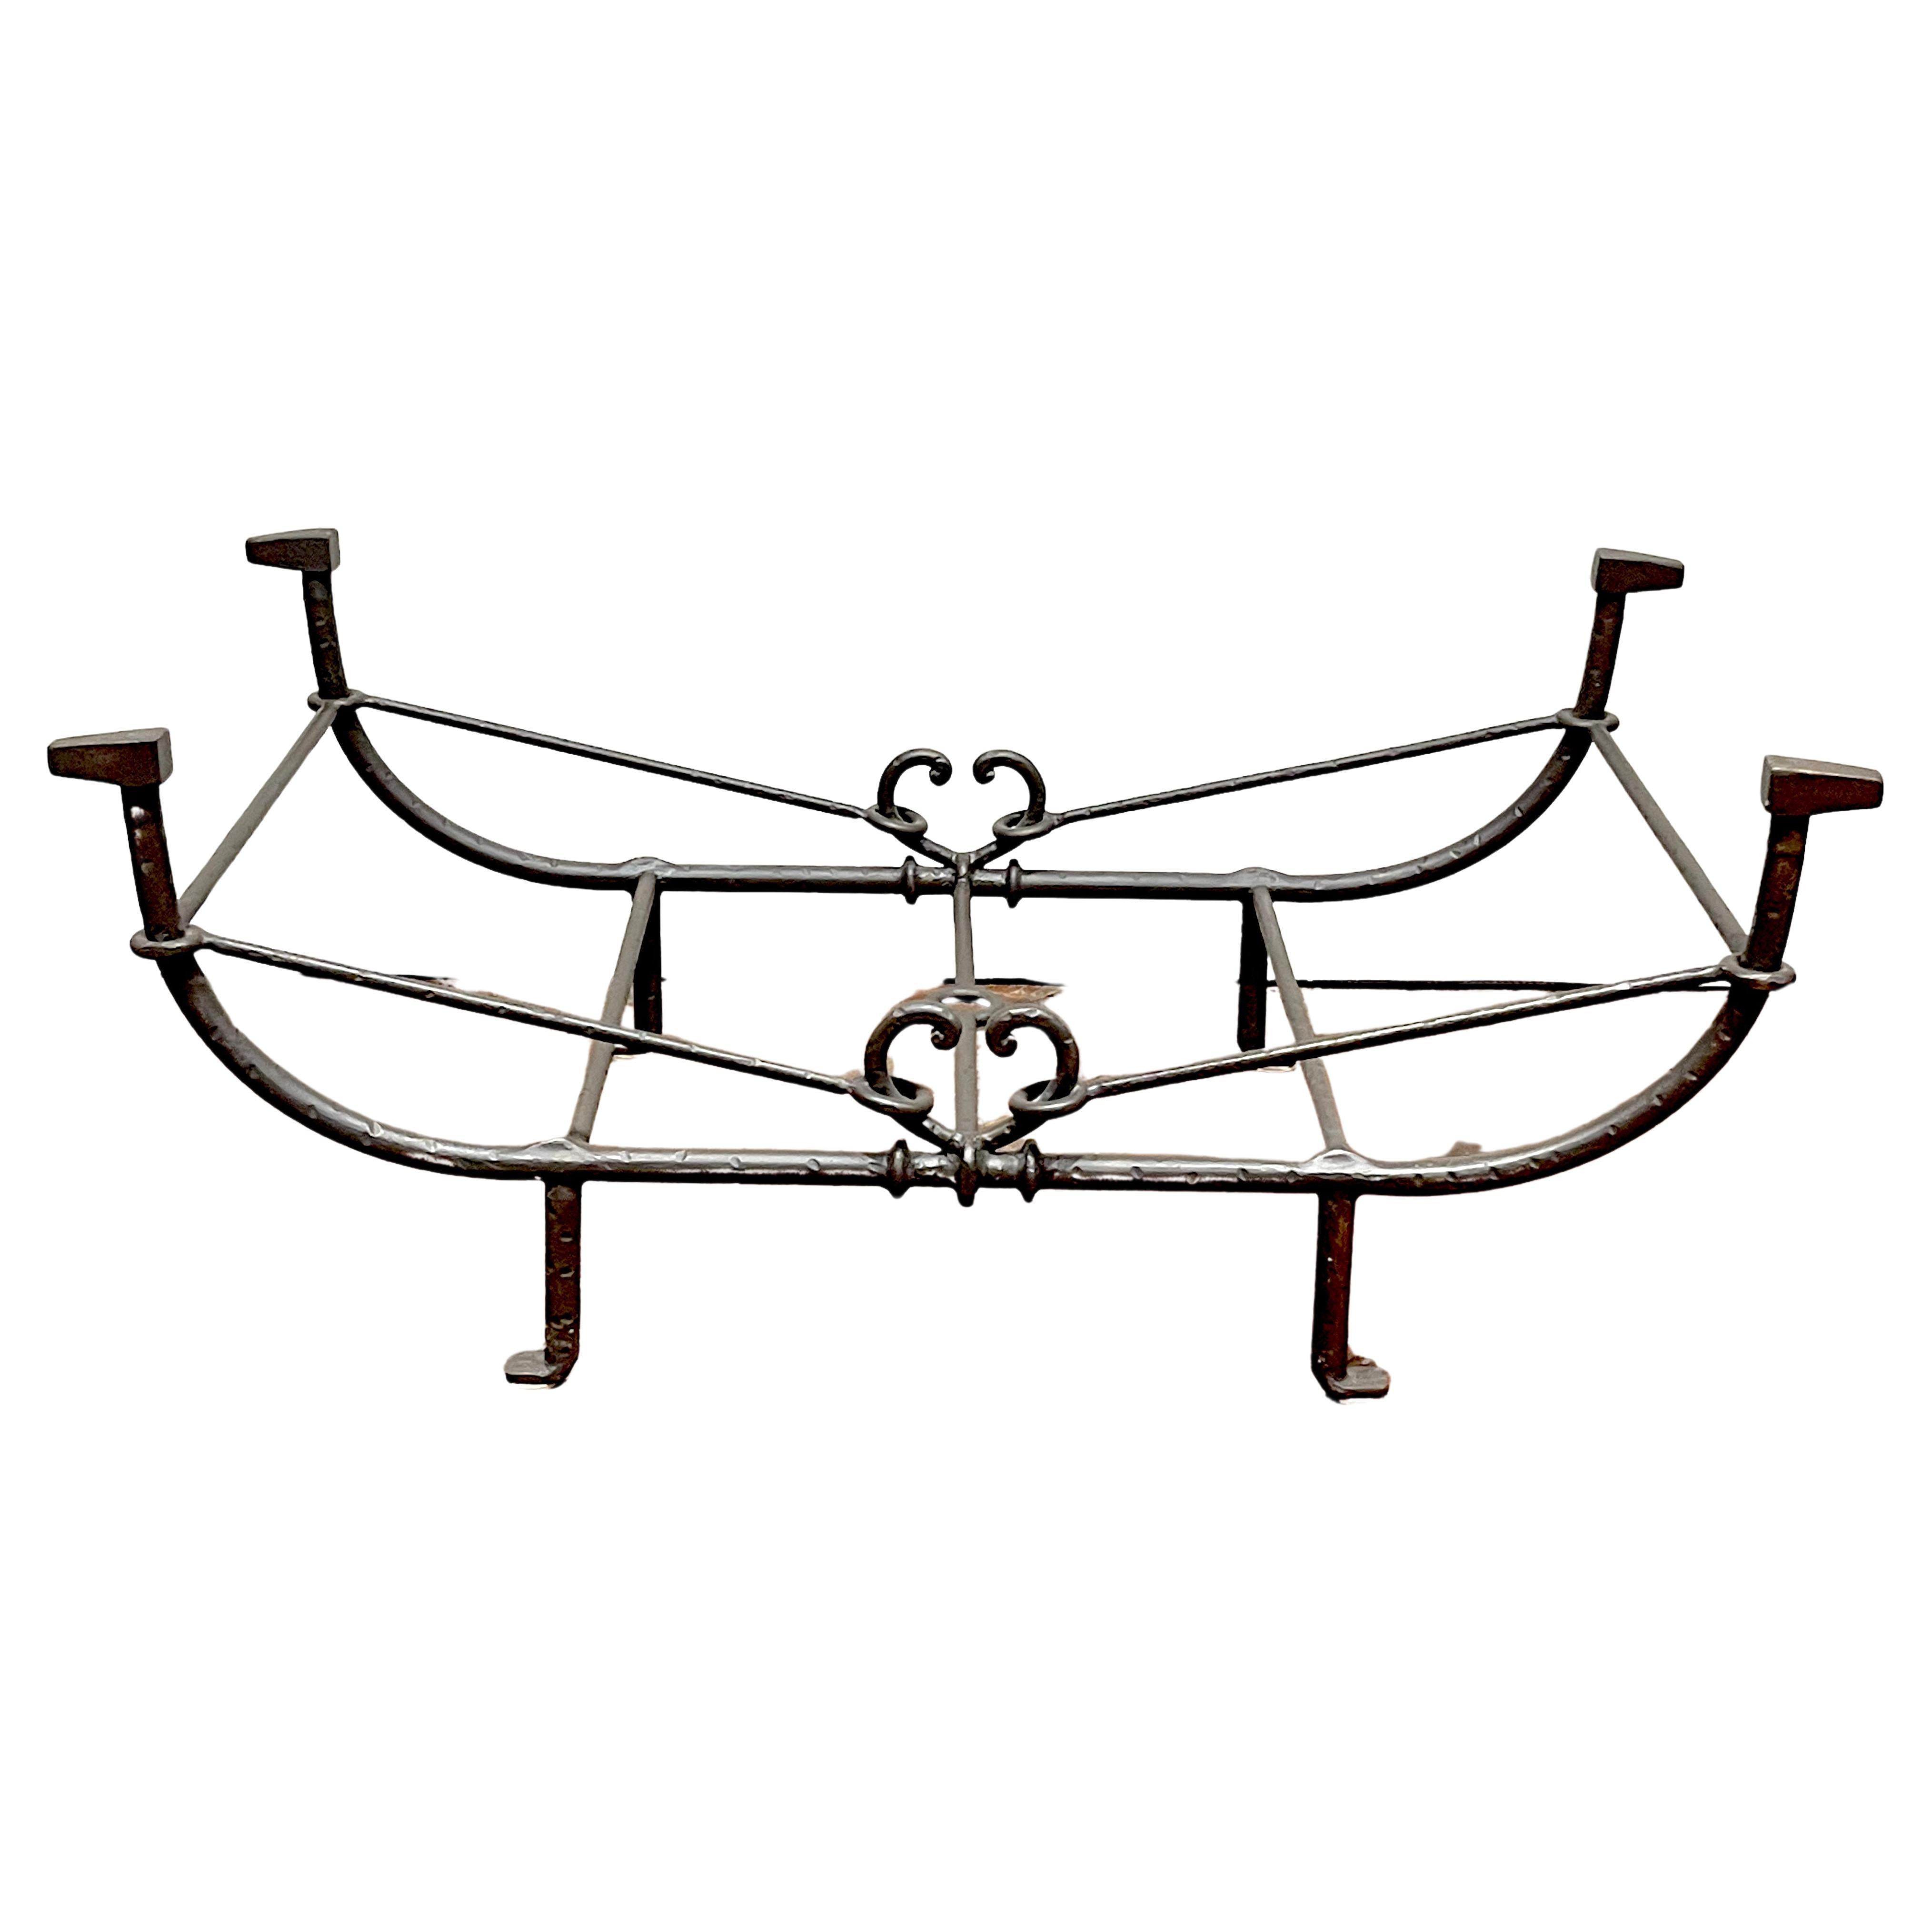 Paul Ferrante Sculptural Iron Coffee Table Base, Style of Giacometti  For Sale